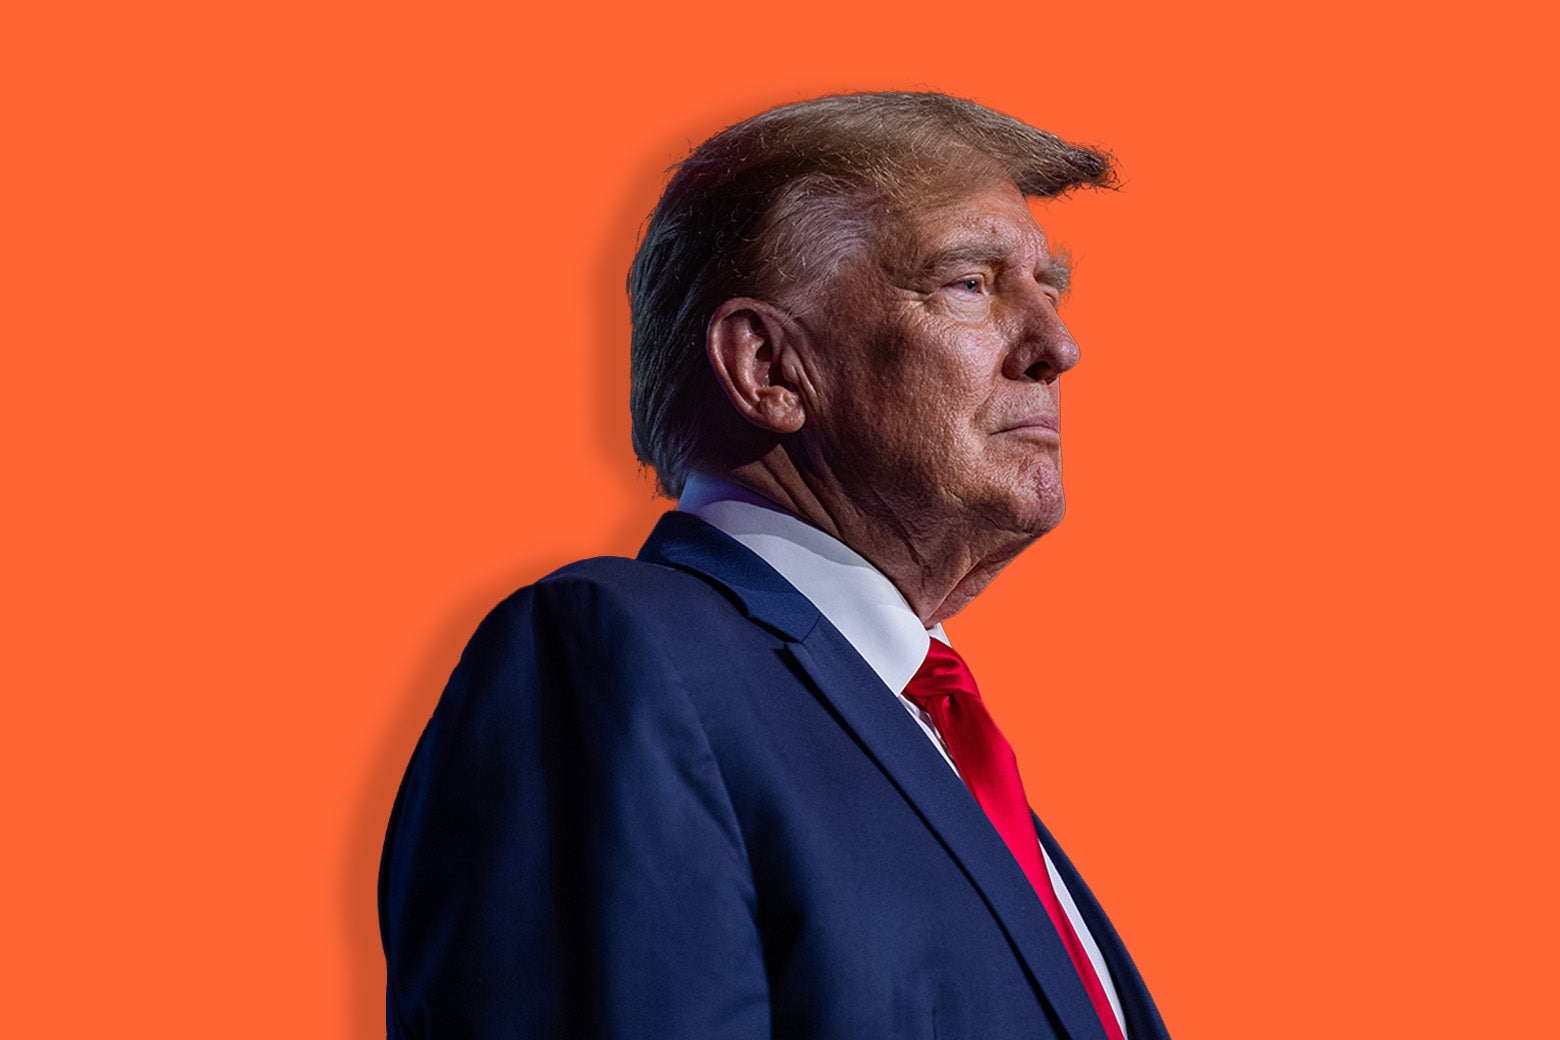 A solemn-looking Donald Trump in side profile, against an orange background.